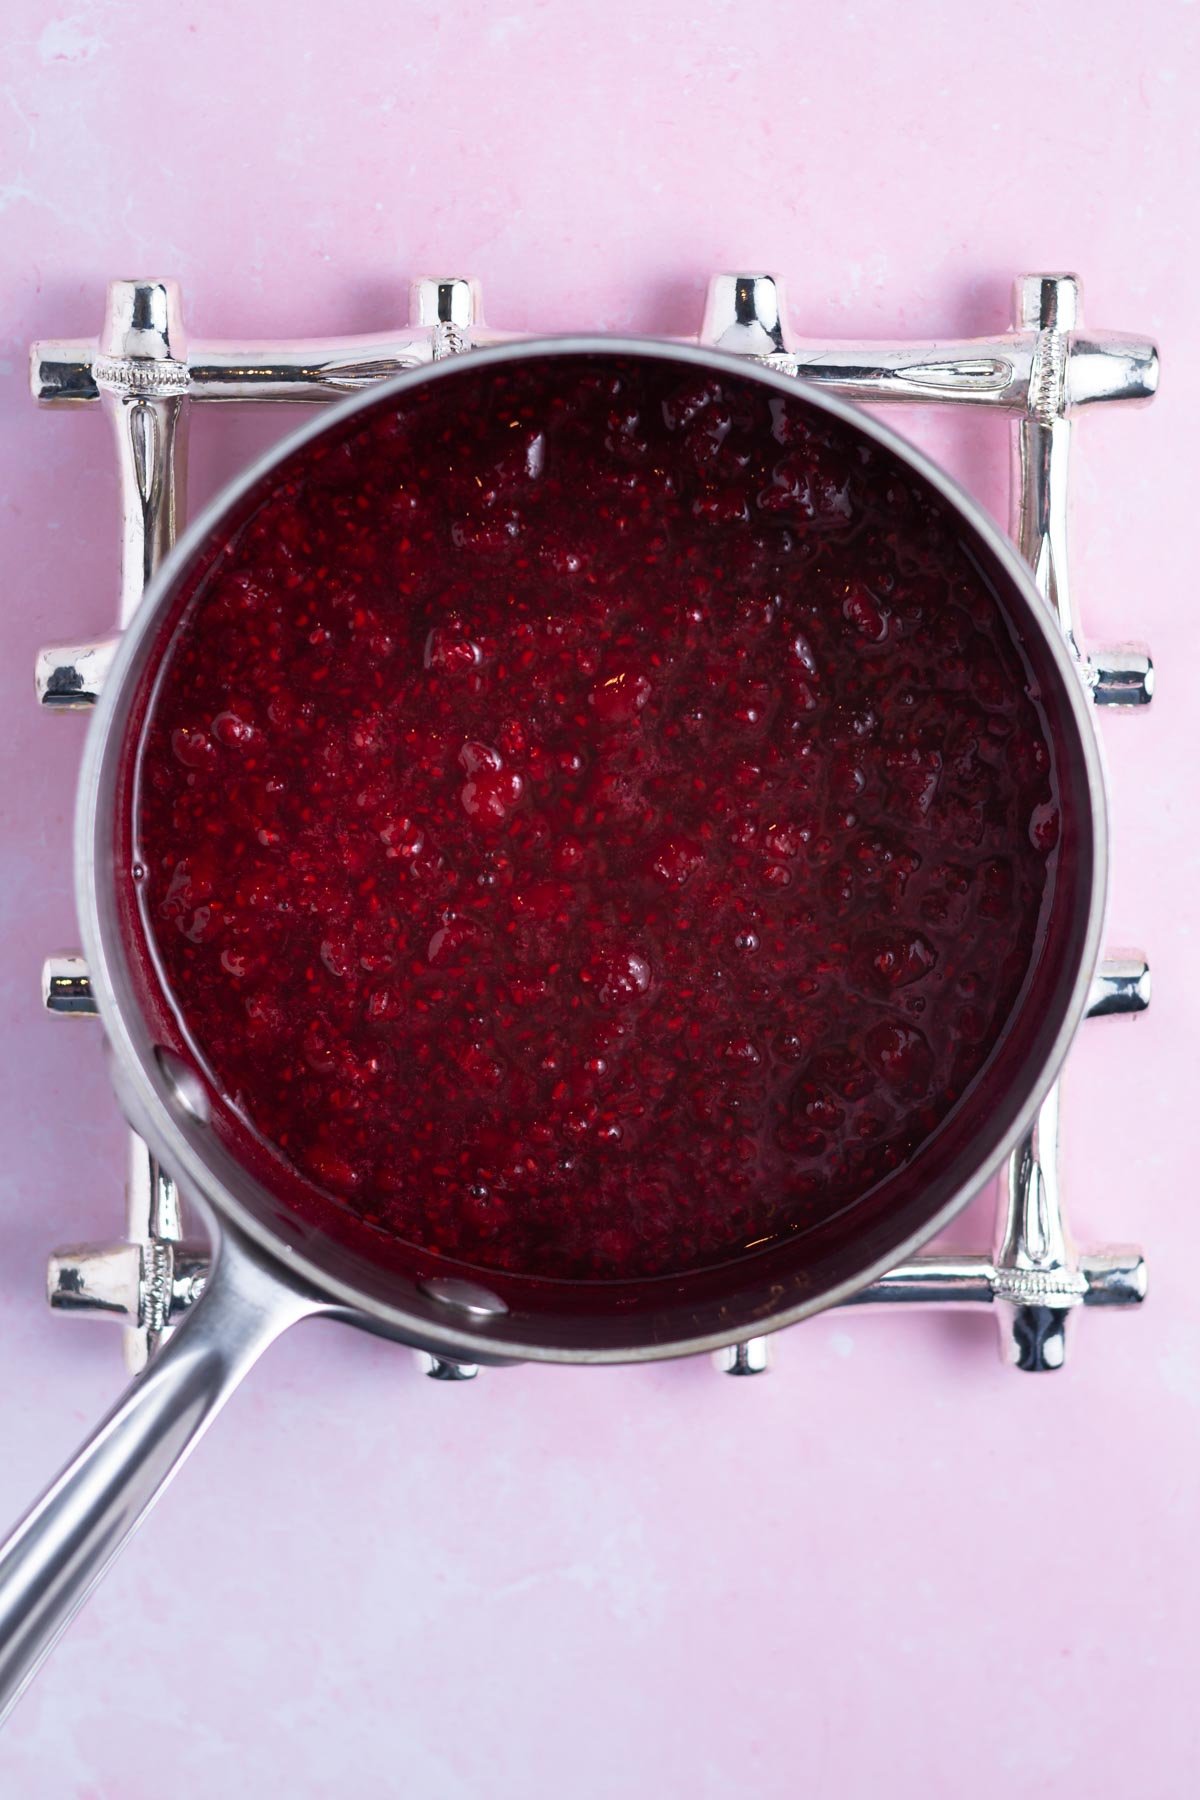 cooked raspberry sauce before pureeing